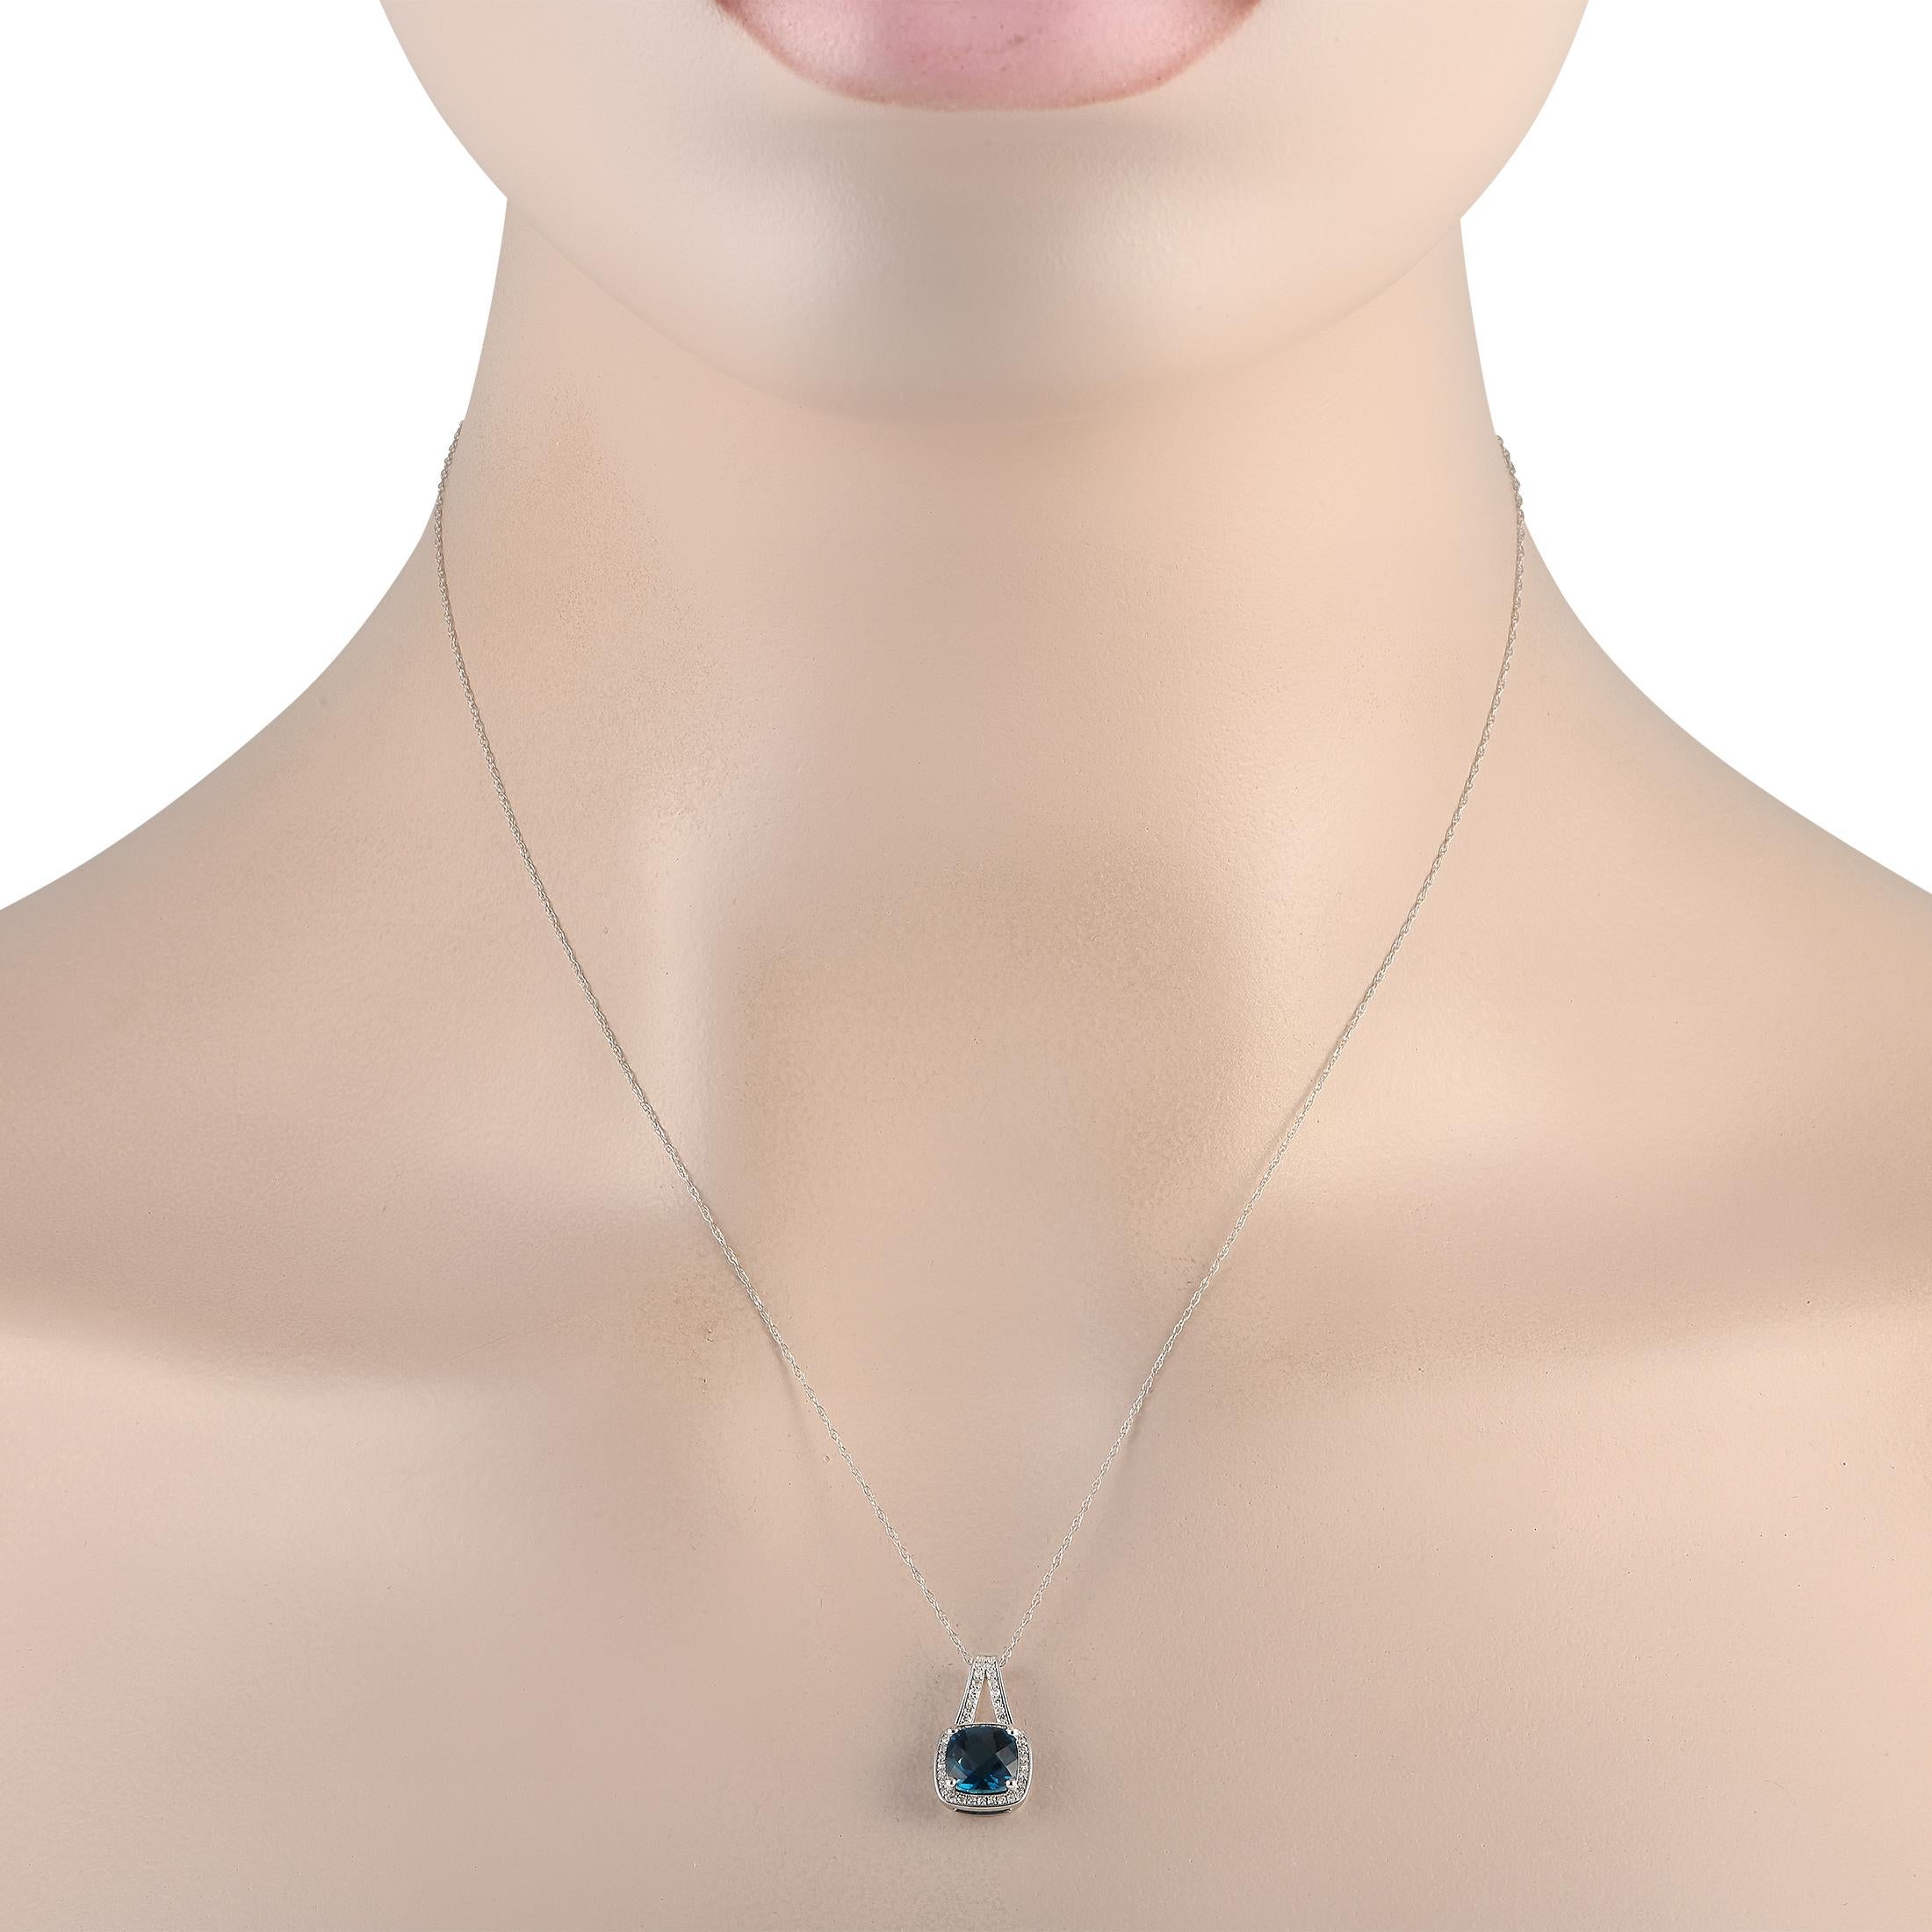 Offering style and sophistication, this gemstone necklace will give any ensemble a radiant polish. The necklace is crafted in 14K white gold and has a spring ring clasp. It holds a blue topaz pendant surrounded by a cushion-shaped frame of round